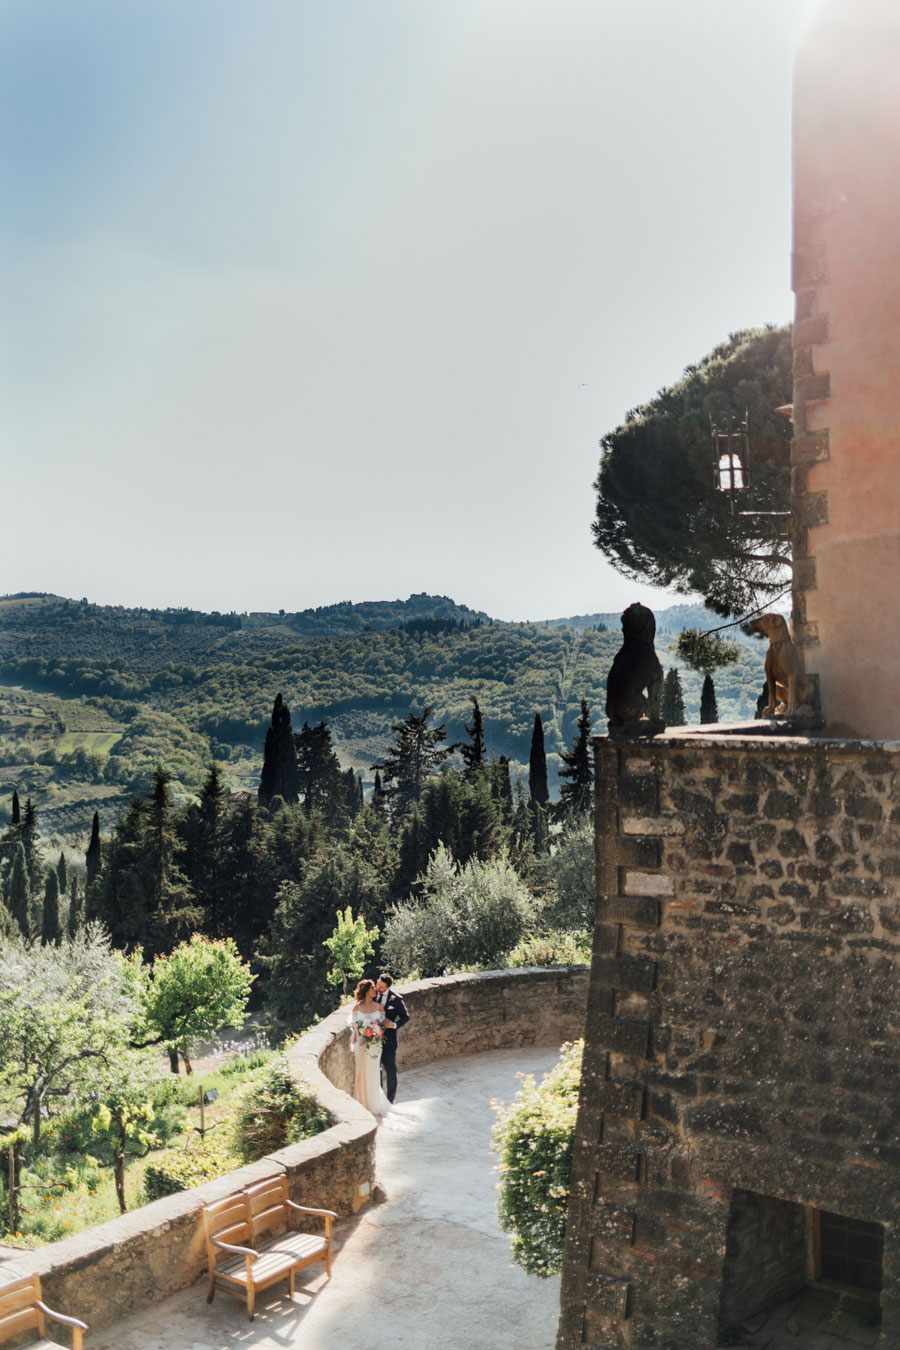 Peach & Coral, An Intimate Elopement in Tuscany: Tanya & Maciej